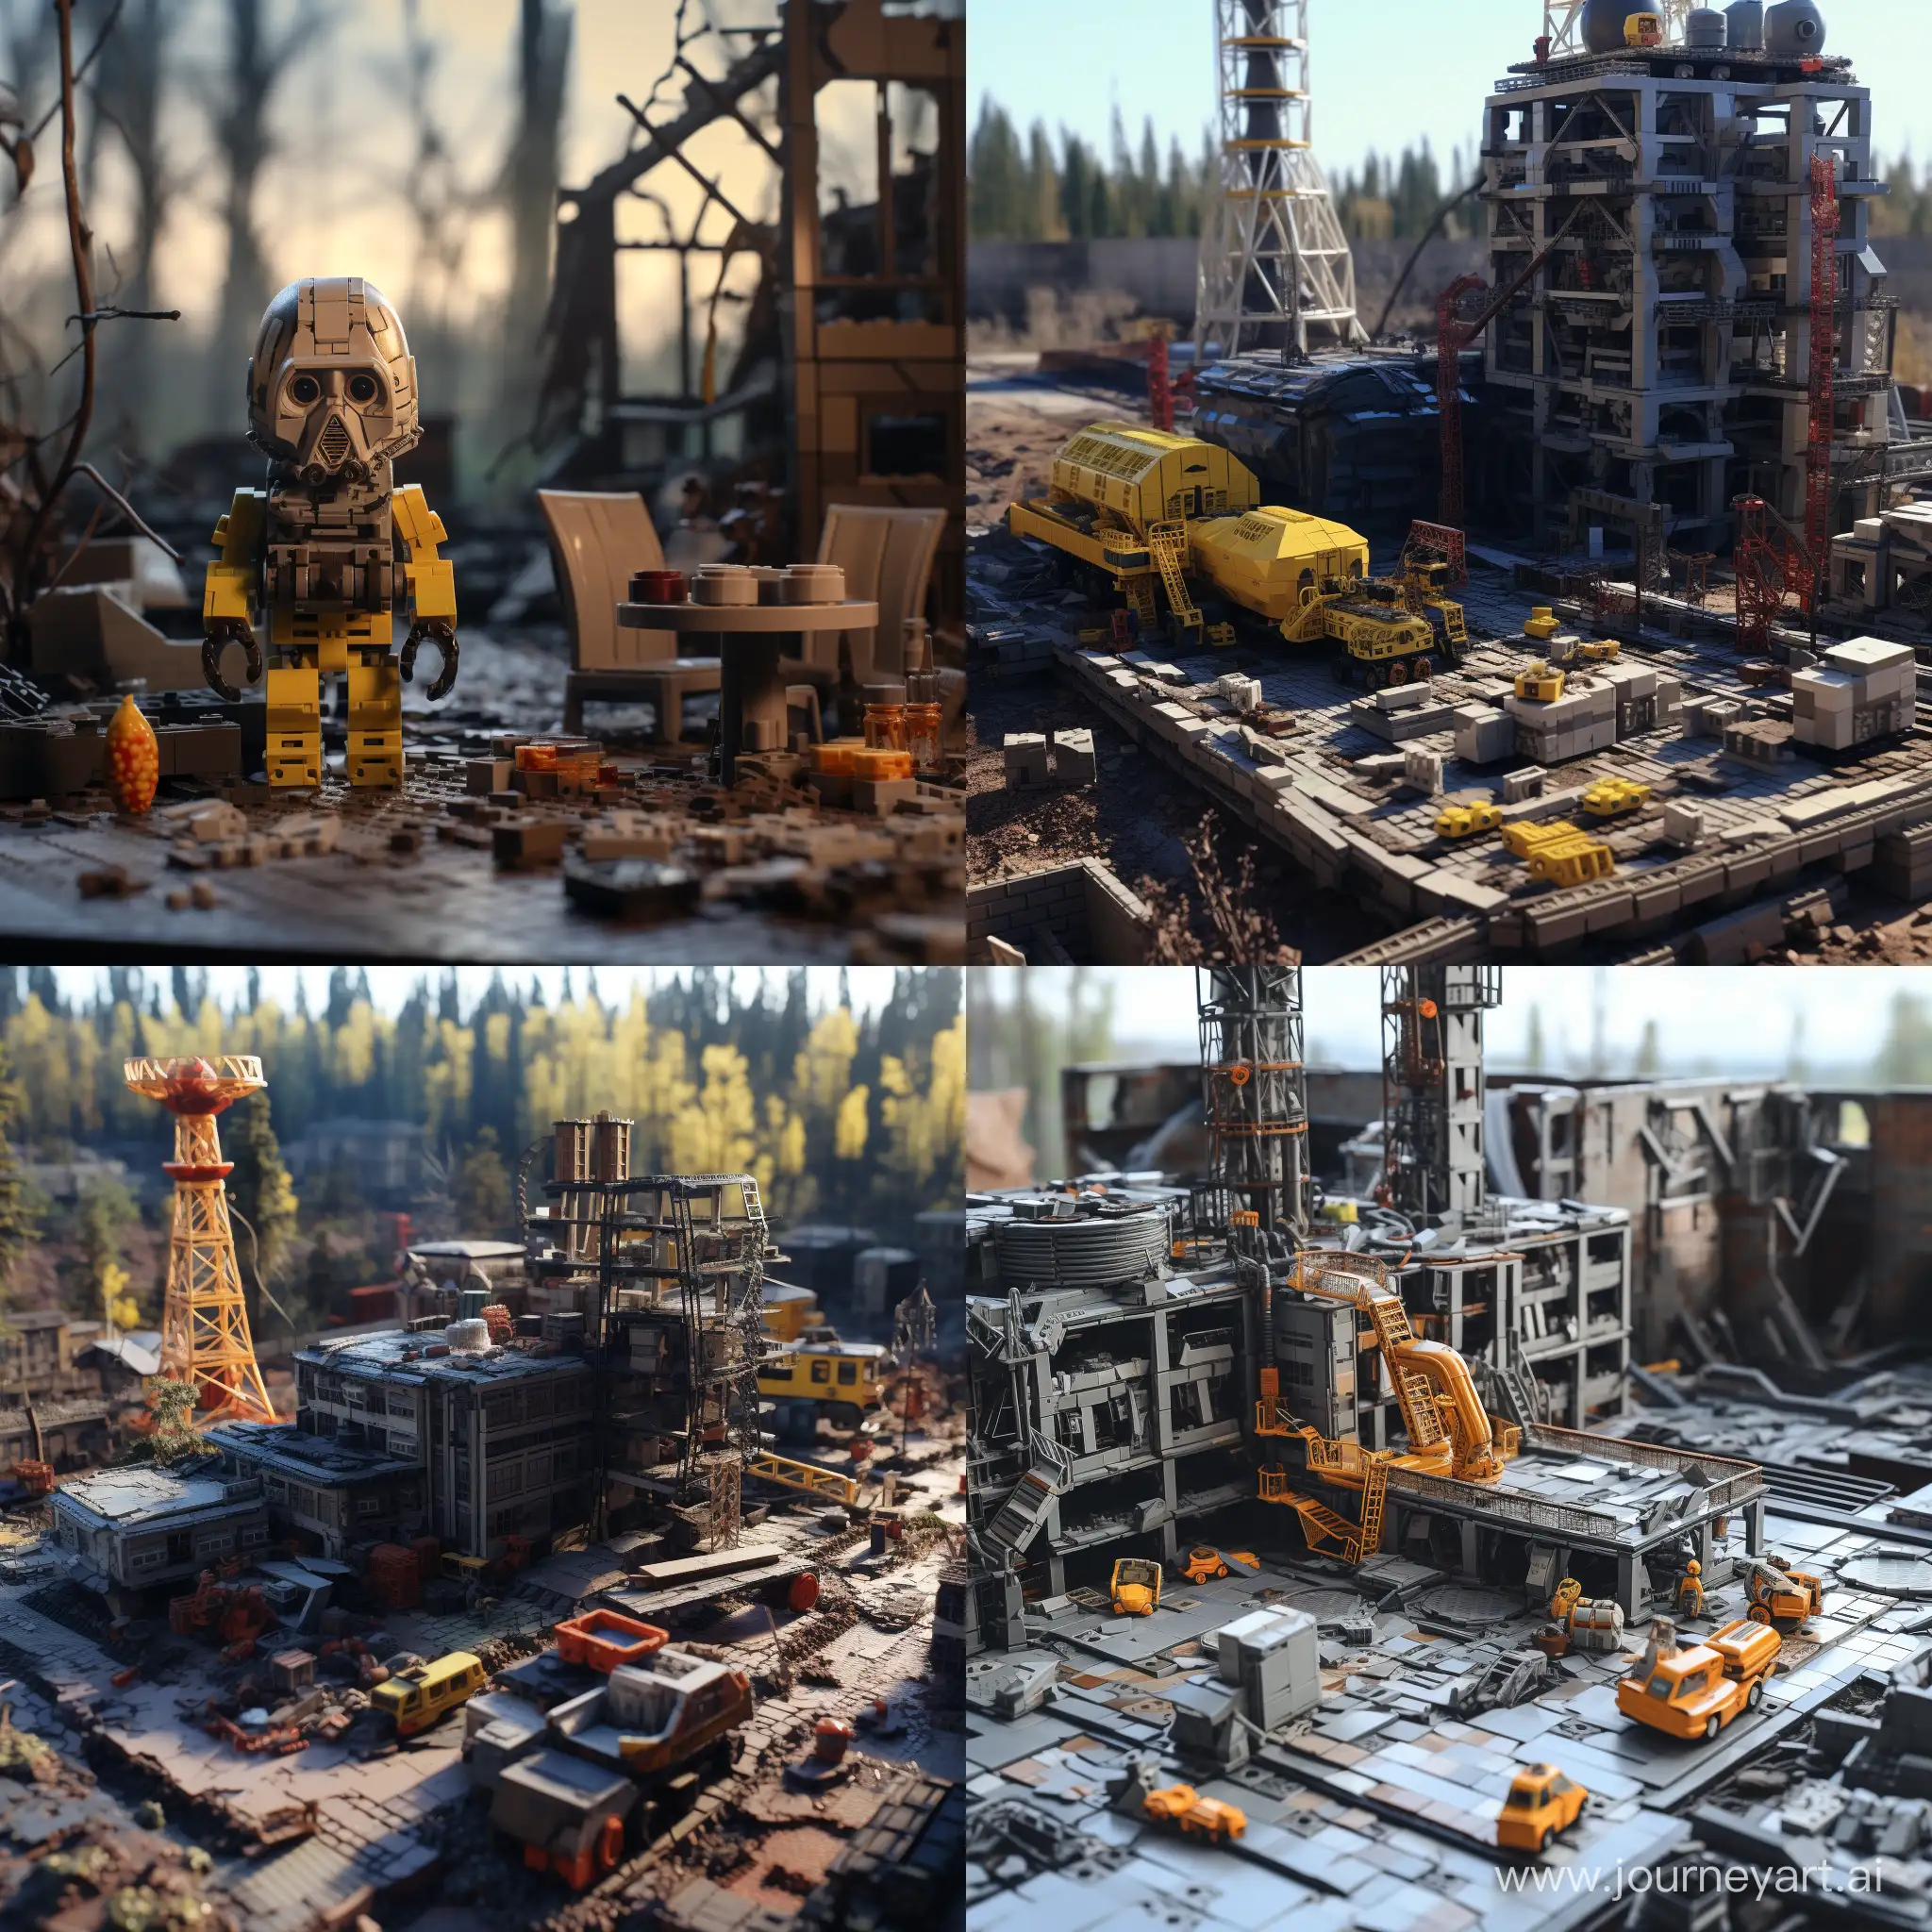 Chernobyl-Lego-Set-Recreation-with-Detailed-Bricks-and-Structures